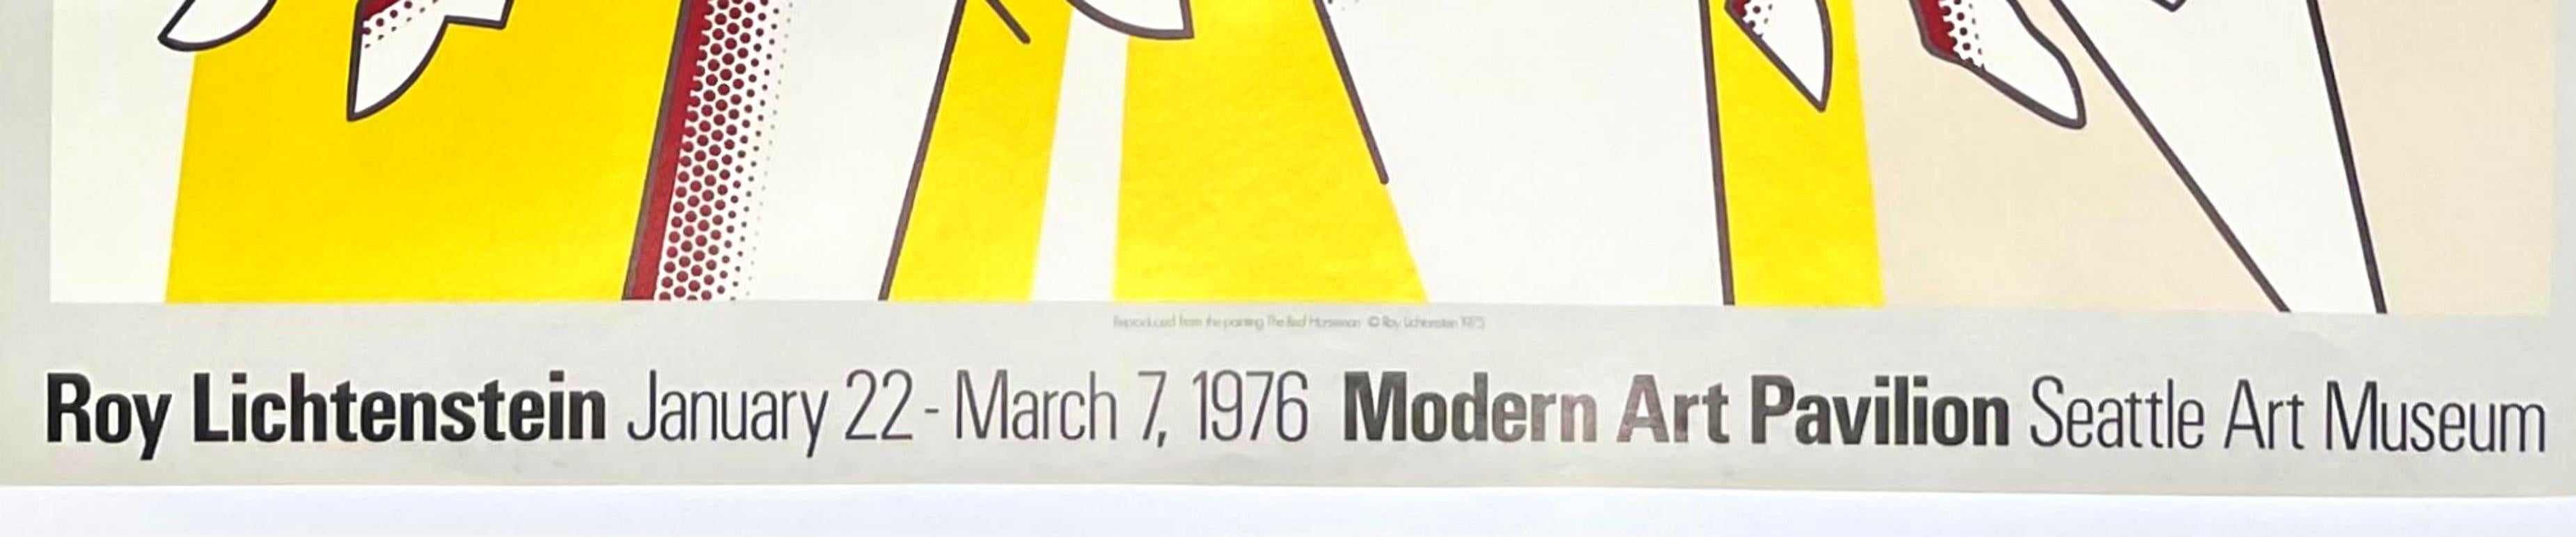 Roy Lichtenstein at Modern Art Pavilion, Seattle Art Museum Limited Edition poster, 1976
Offset lithograph
Limited Edition of 1500 
22 1/2 × 28 inches
Unframed
This limited edition offset lithograph poster was published on the Roy Lichtenstein